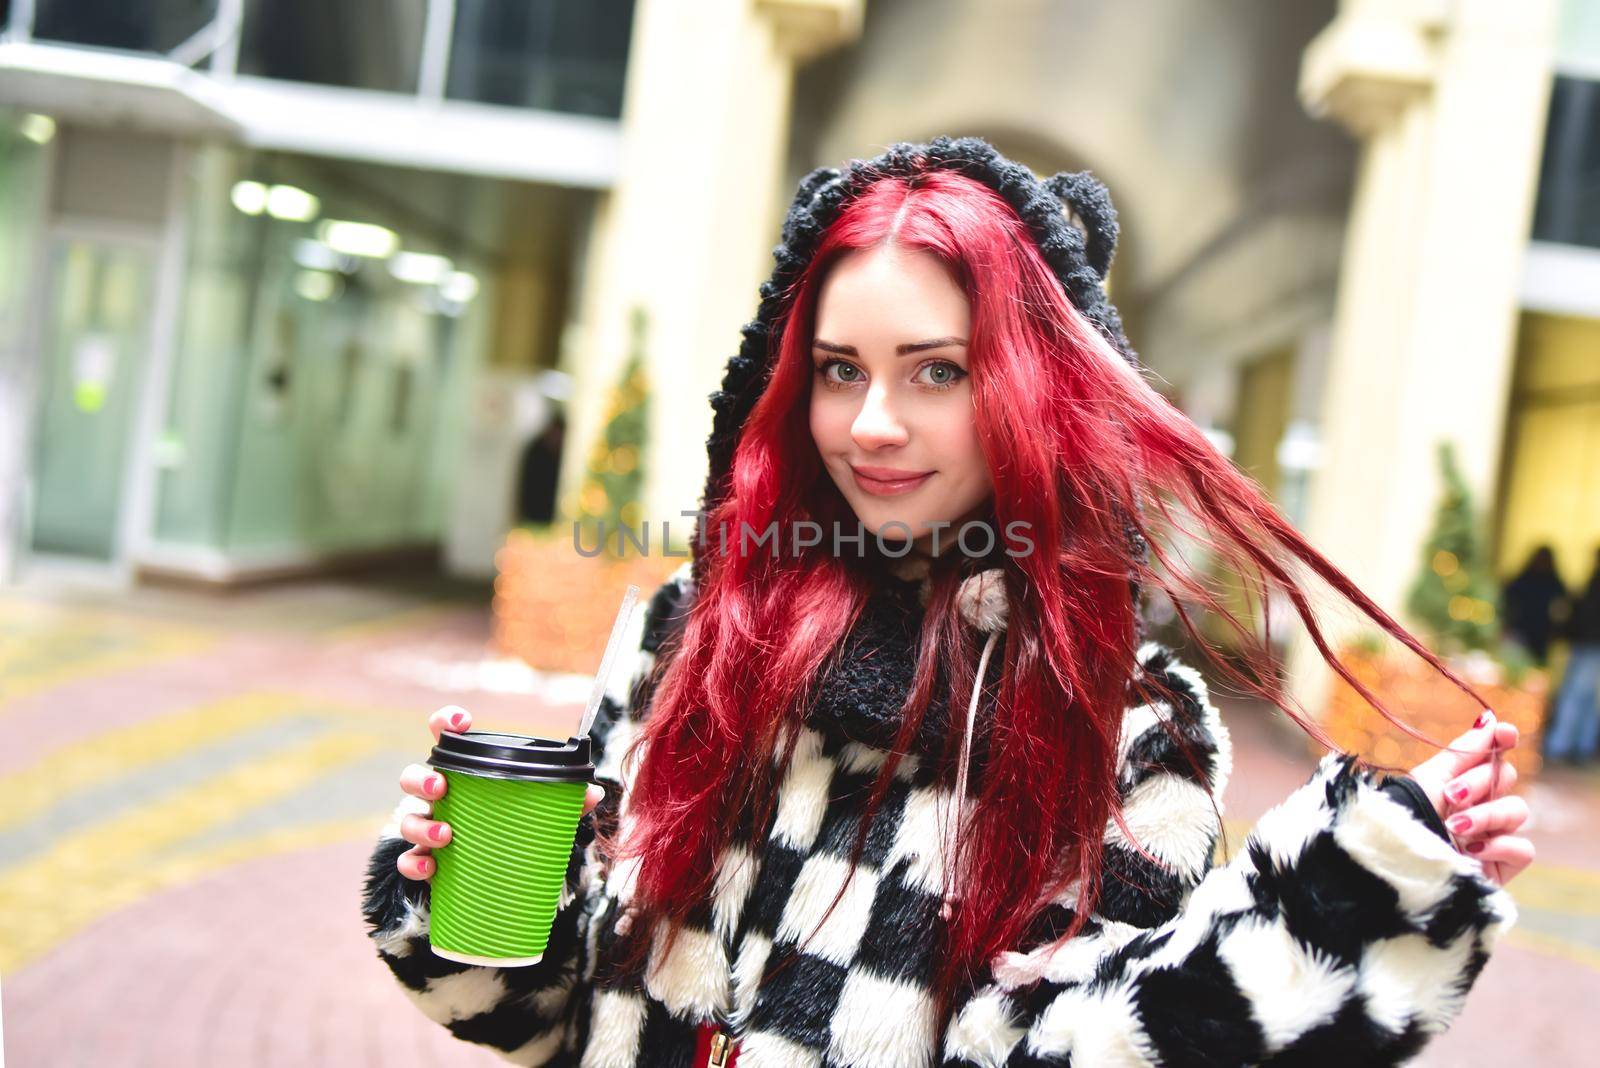 Near portrait of a teen girl with red hair in warm clothes standing outside on a cold day with a cup of coffee in her hands and looks into the camera. Cute girl walking with coffee in her hands and playing with own hair.